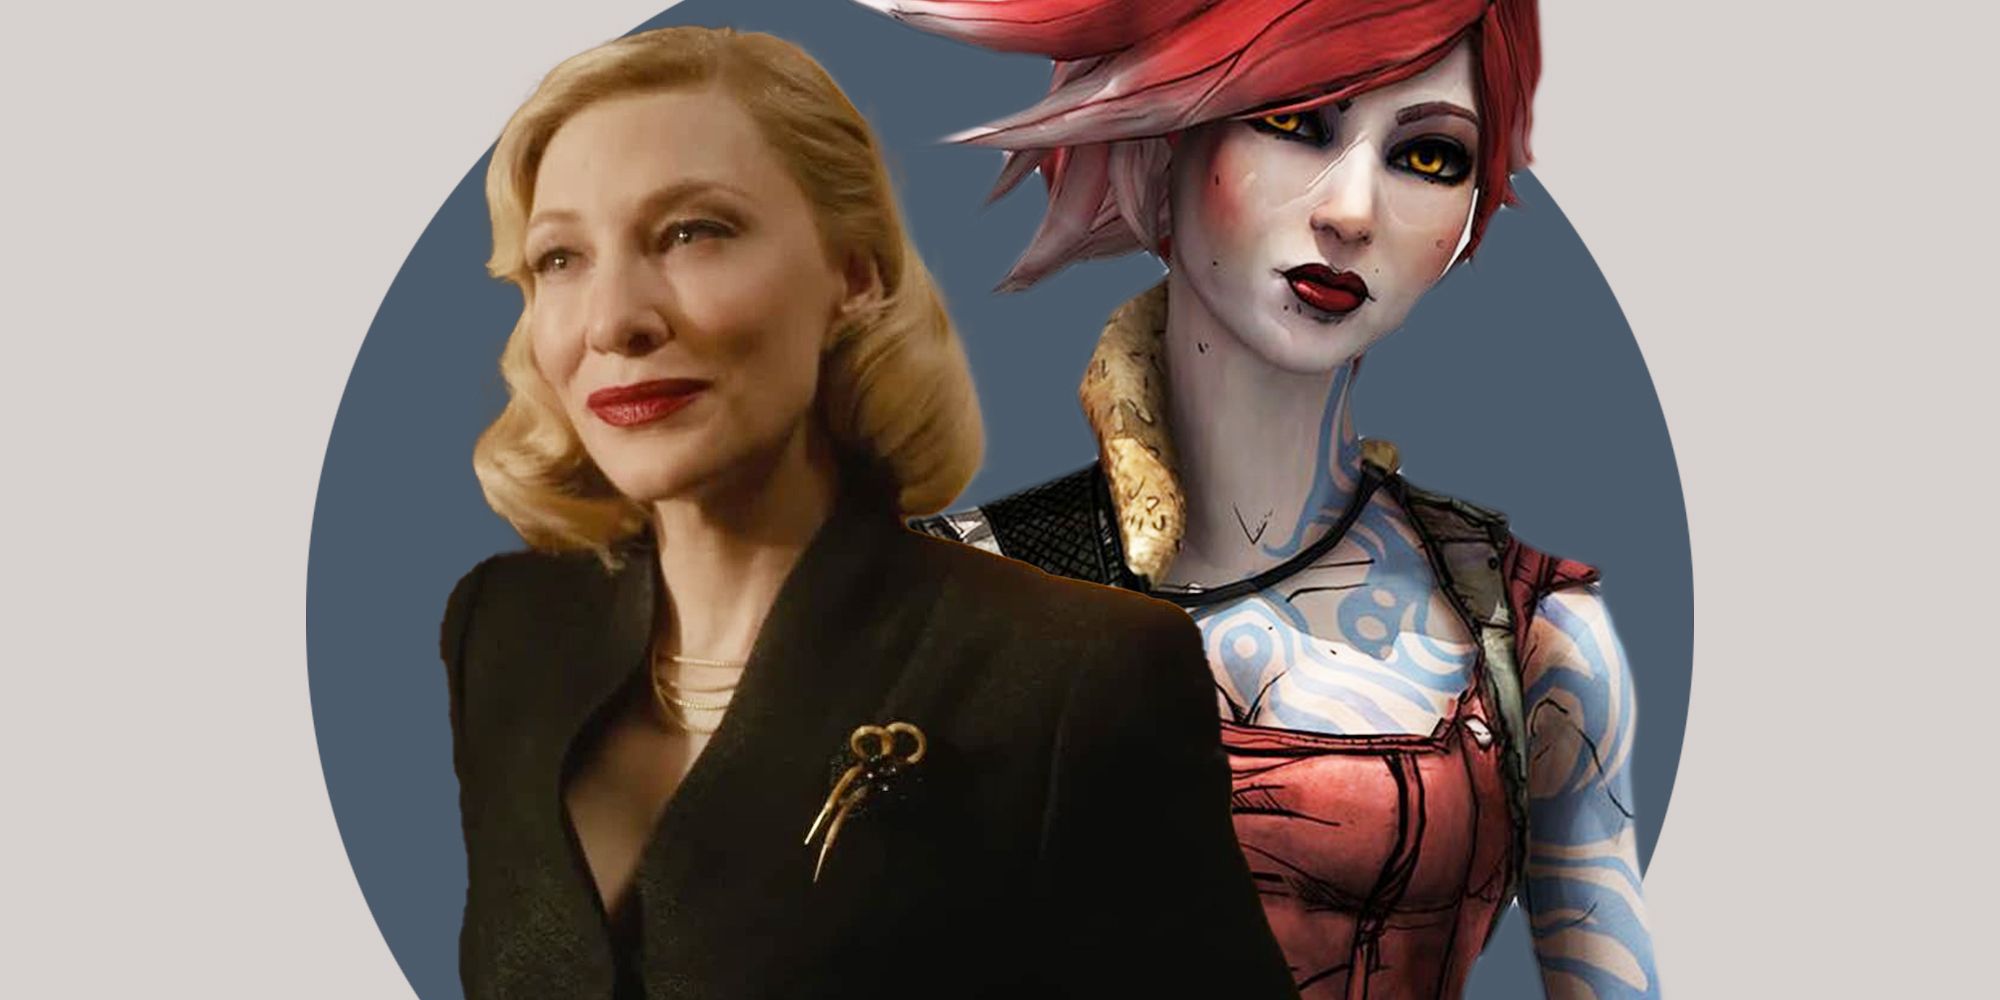 Borderlands Movie Set Photos Show Cate Blanchett As Lilith